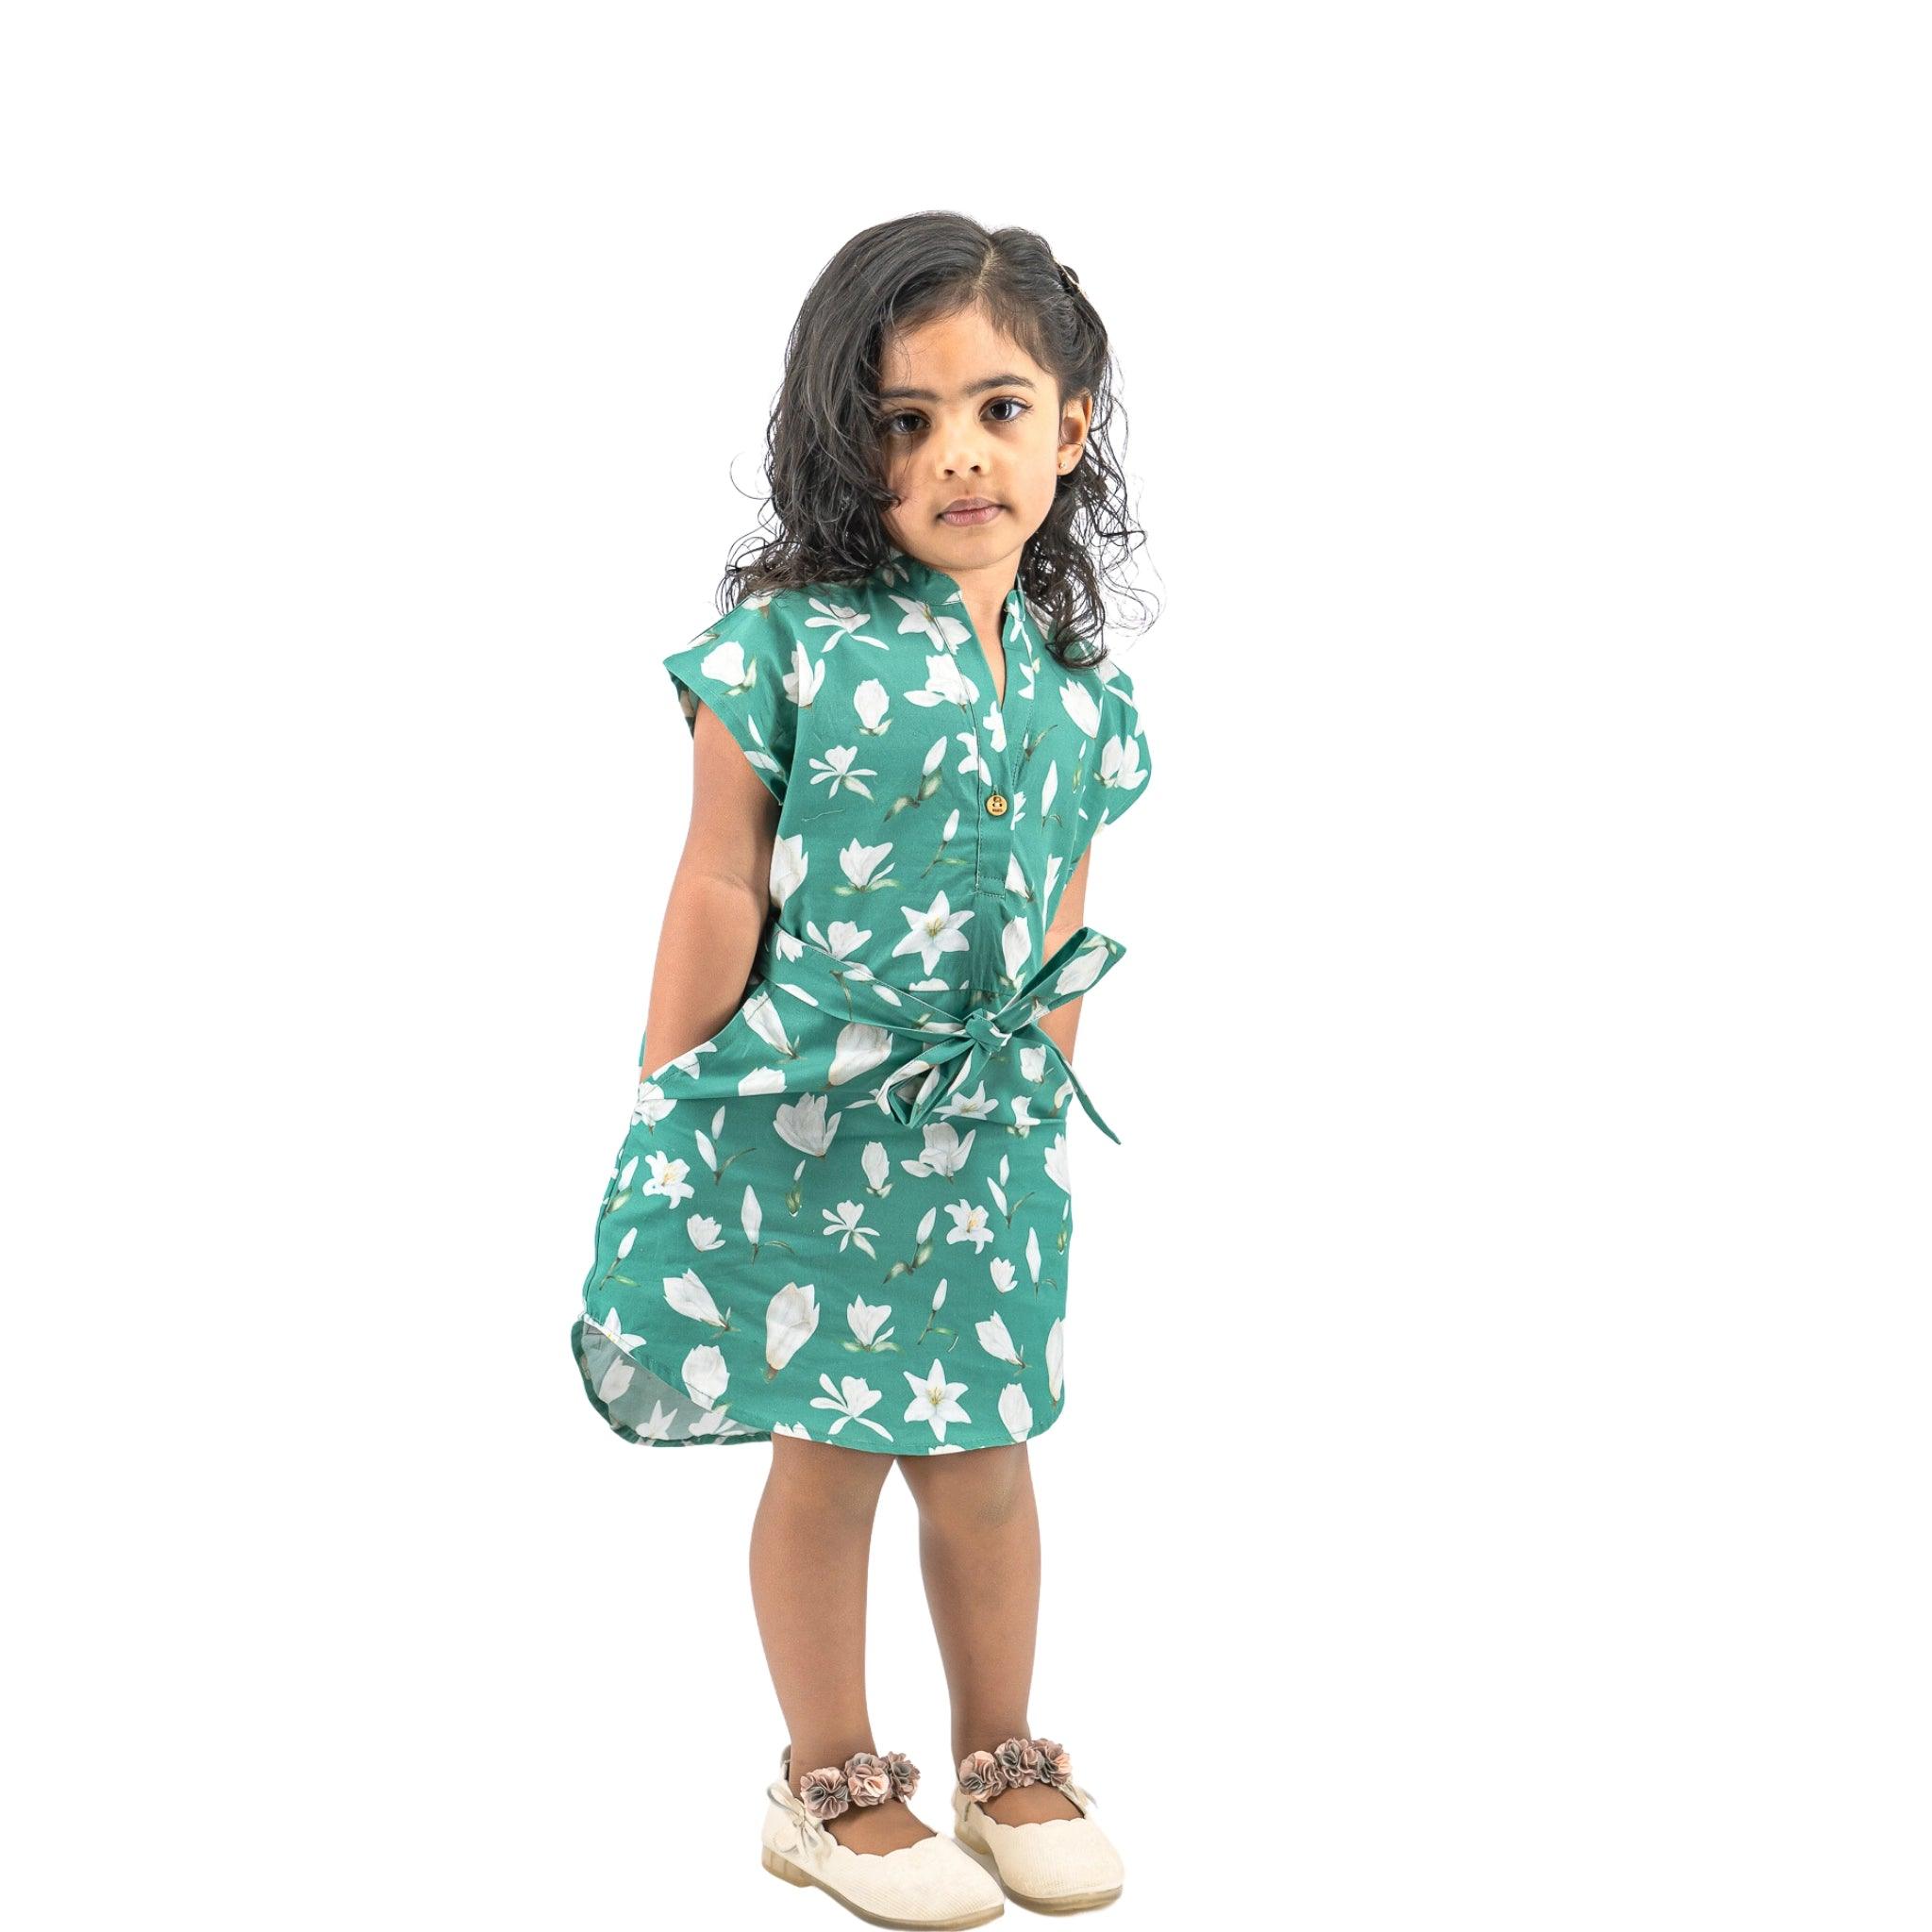 A young girl in a Bottle Green Lilly Blossom Cotton Shirt Dress for Kids by Karee stands looking at the camera, isolated on a white background.